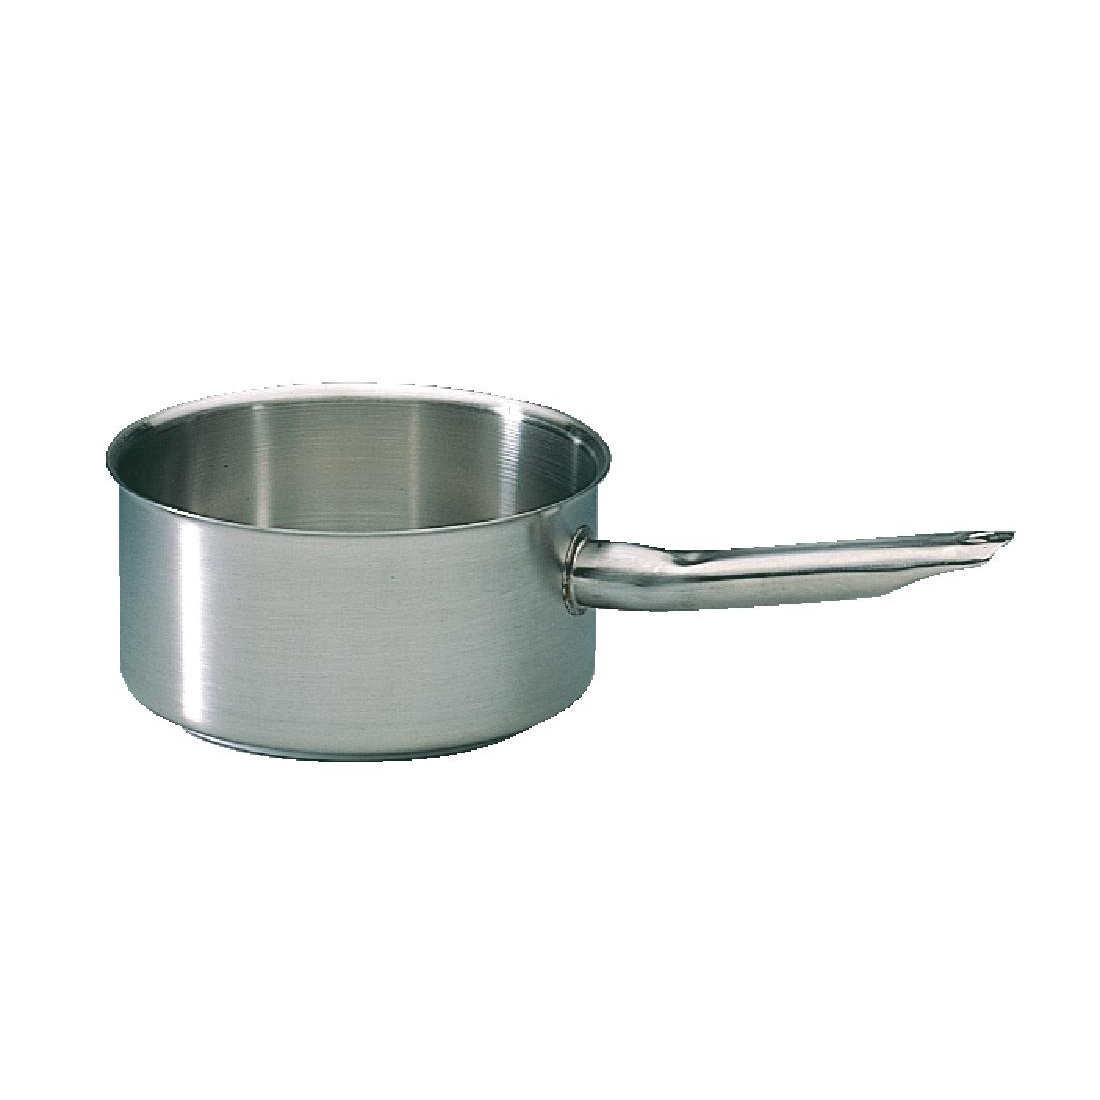 Bourgeat Stainless Steel Excellence Saucepan 1Ltr